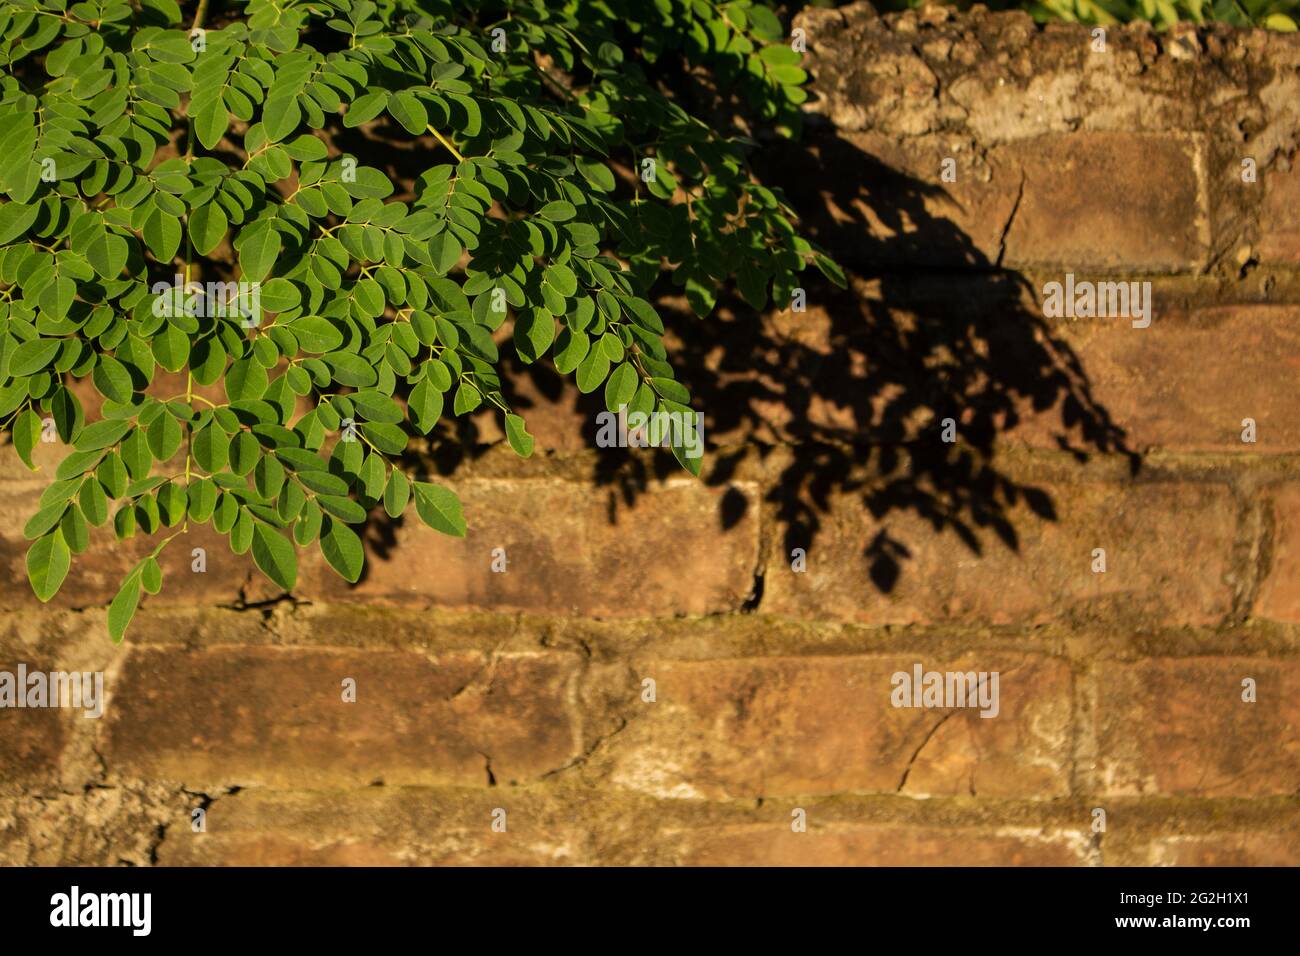 Fresh Green Moringa leaves. The old brick walls are covered with green leaves. It can be a beautiful background. Stock Photo